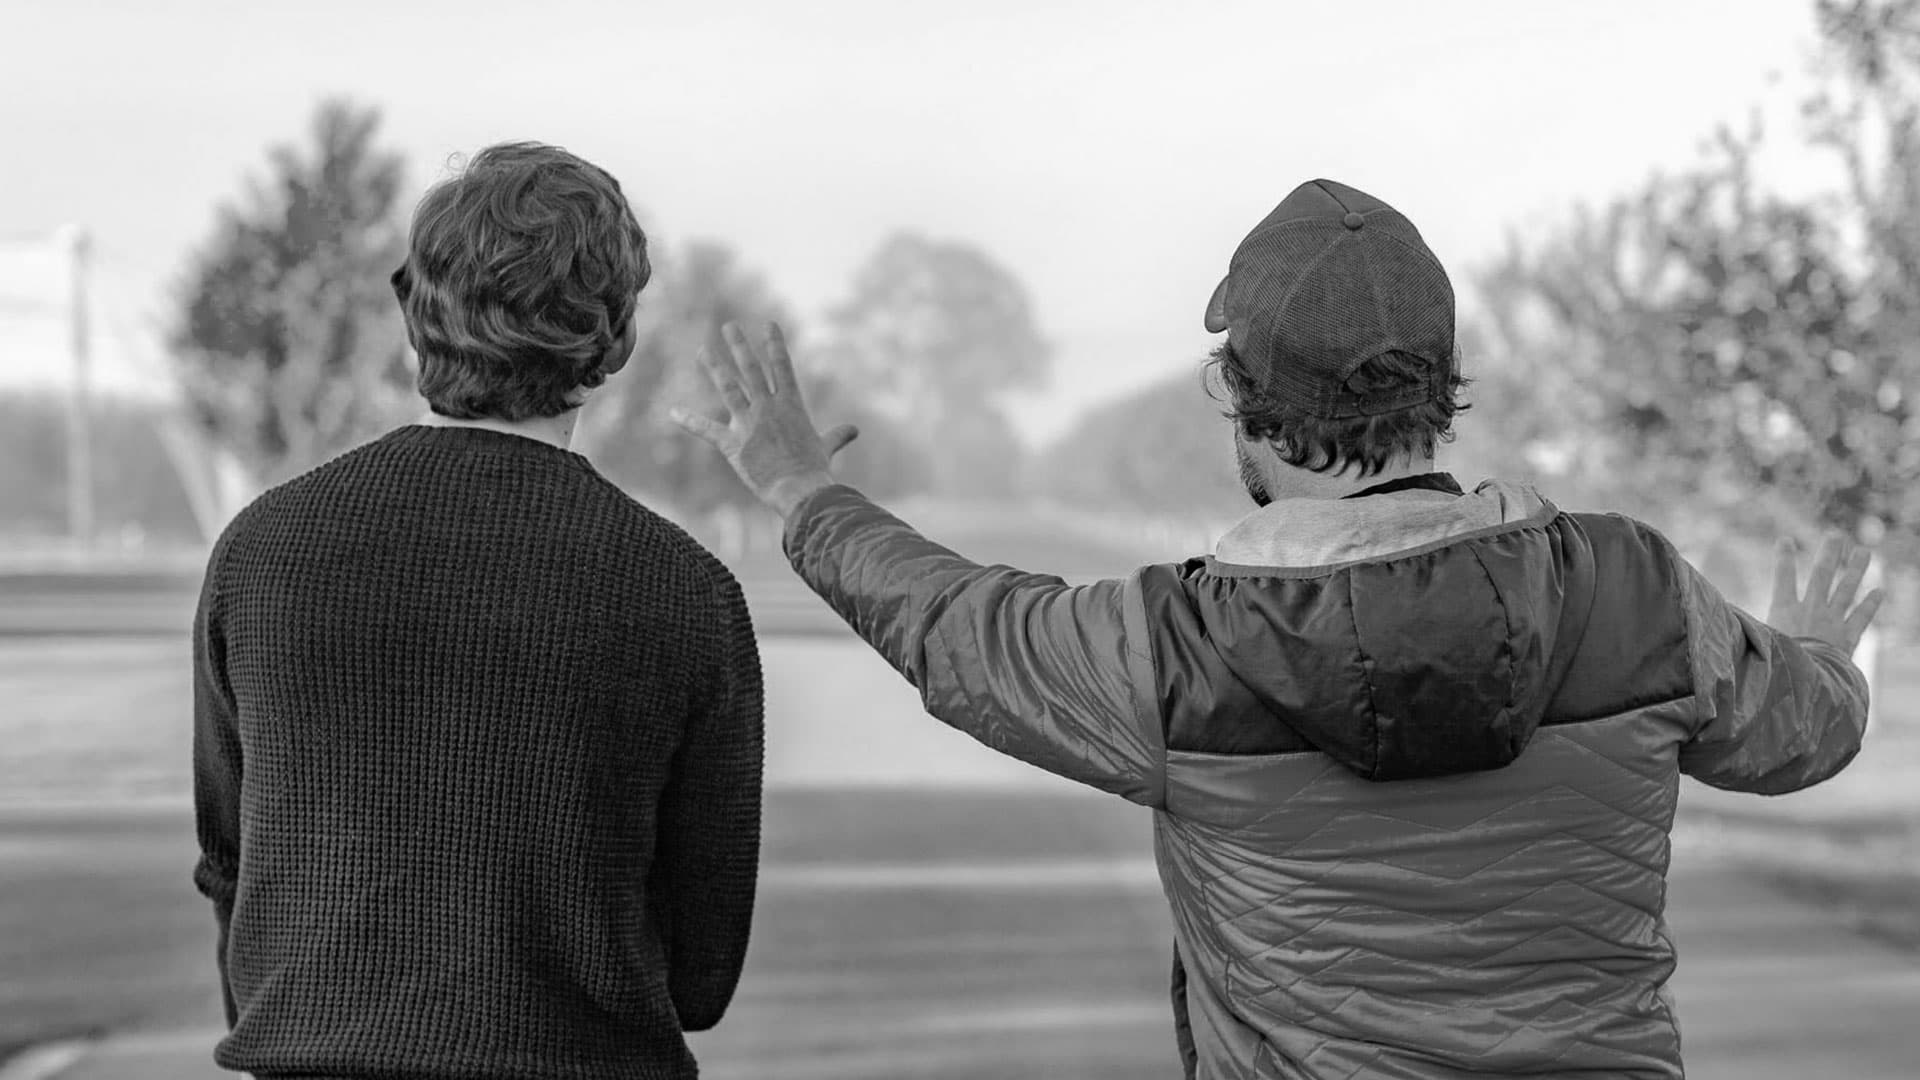 Two individuals engaged in a conversation, with one person gesturing expressively with their hand, possibly explaining something or telling a story, while standing outdoors with trees and an open space in the background. the image is captured in black and white, emphasizing the silhouettes and expressions of the subjects.